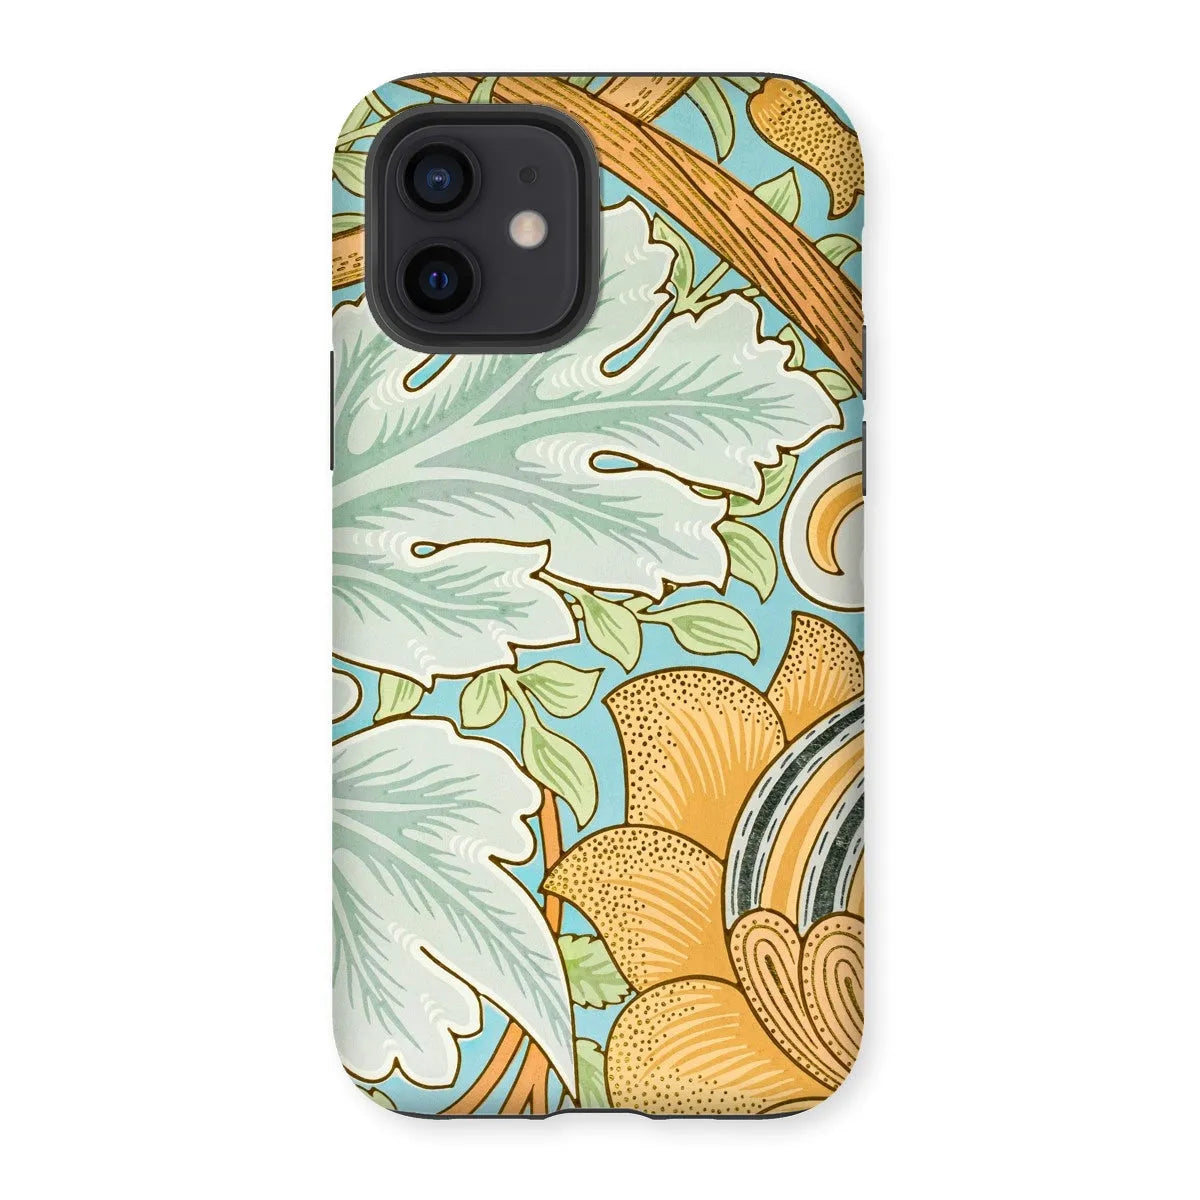 St. James - Arts And Crafts Phone Case - William Morris - Iphone 12 / Matte - Mobile Phone Cases - Aesthetic Art